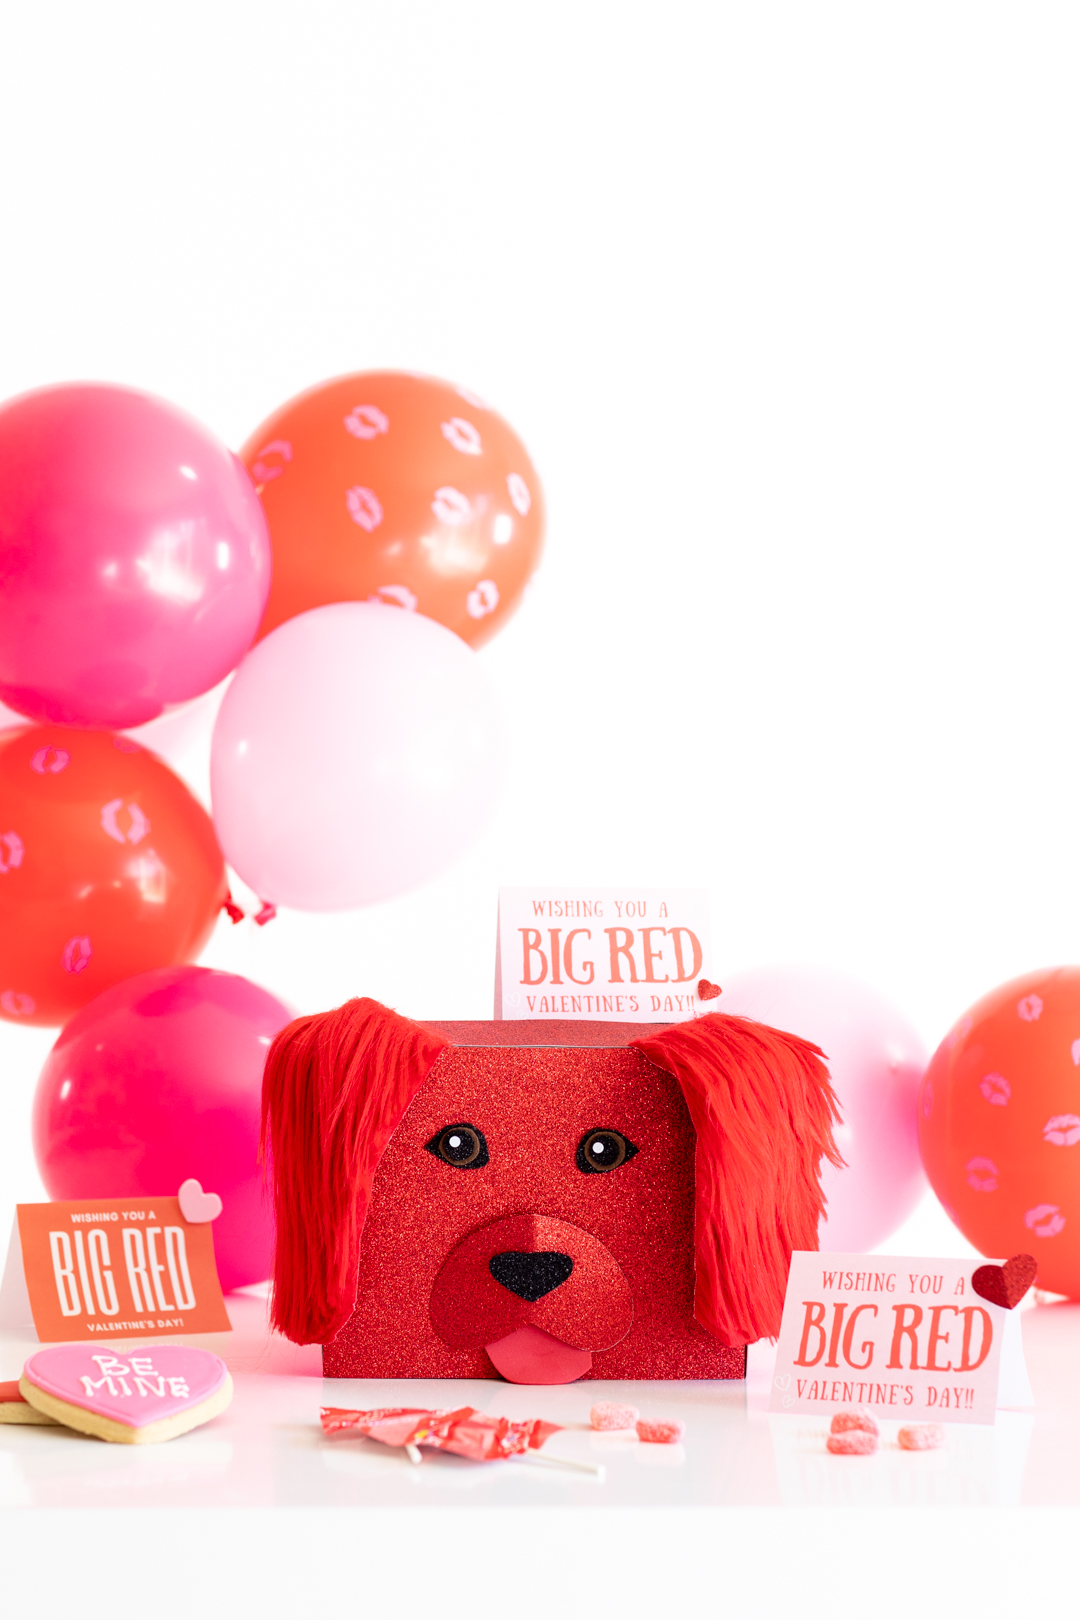 clifford the big red dog movie craft for valentine's day. Card collection box made with red glitter paper and faux red fur. Pink and red balloons in the background and valentine's day cards scattered around the box.